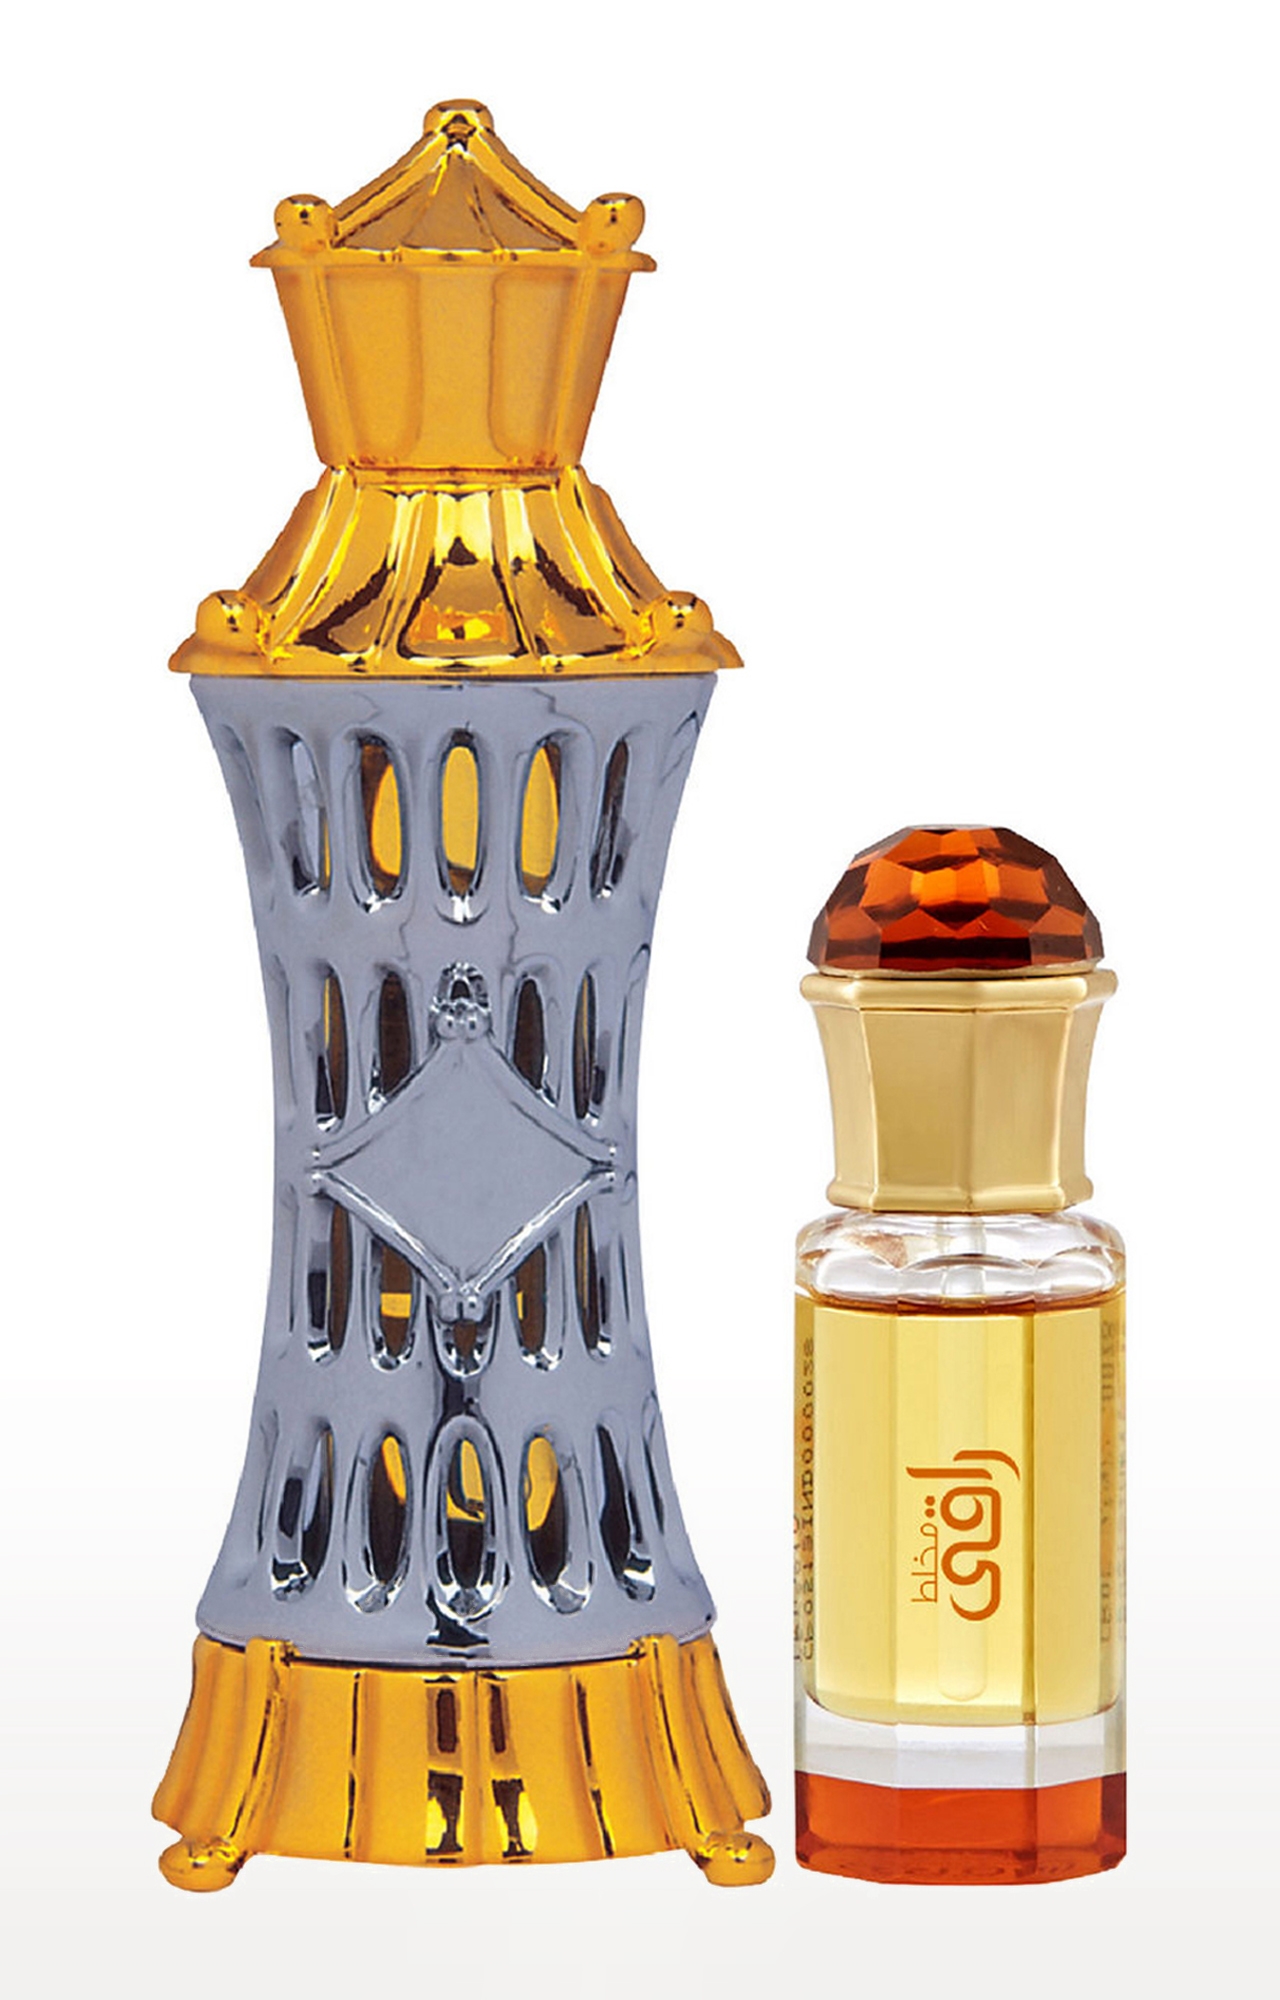 Ajmal Mizyaan Concentrated Perfume Oil Oriental Musky Alcohol-free Attar 14ml for Unisex and Mukhallat Raaqi Concentrated Perfume Oil Alcohol-free Attar 10ml for Unisex